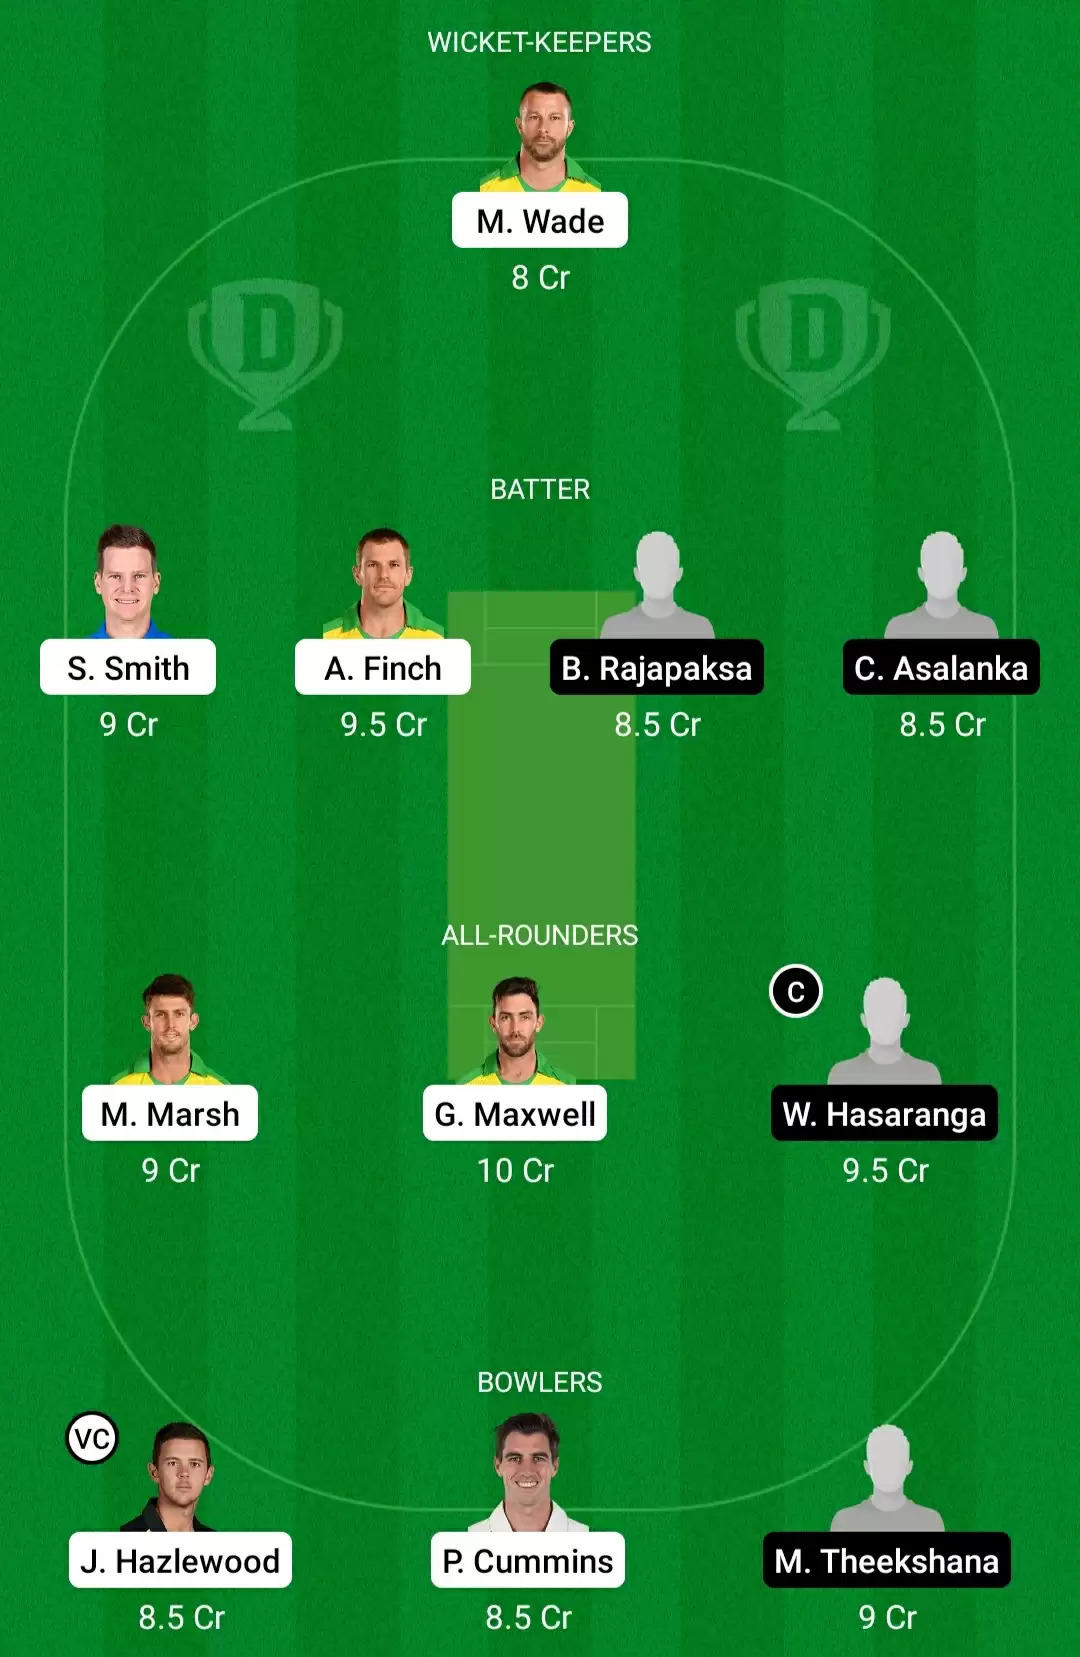 AUS vs SL Dream11 Prediction for T20 World Cup 2021: Playing XI, Fantasy Cricket Tips, Team, Weather Updates and Pitch Report